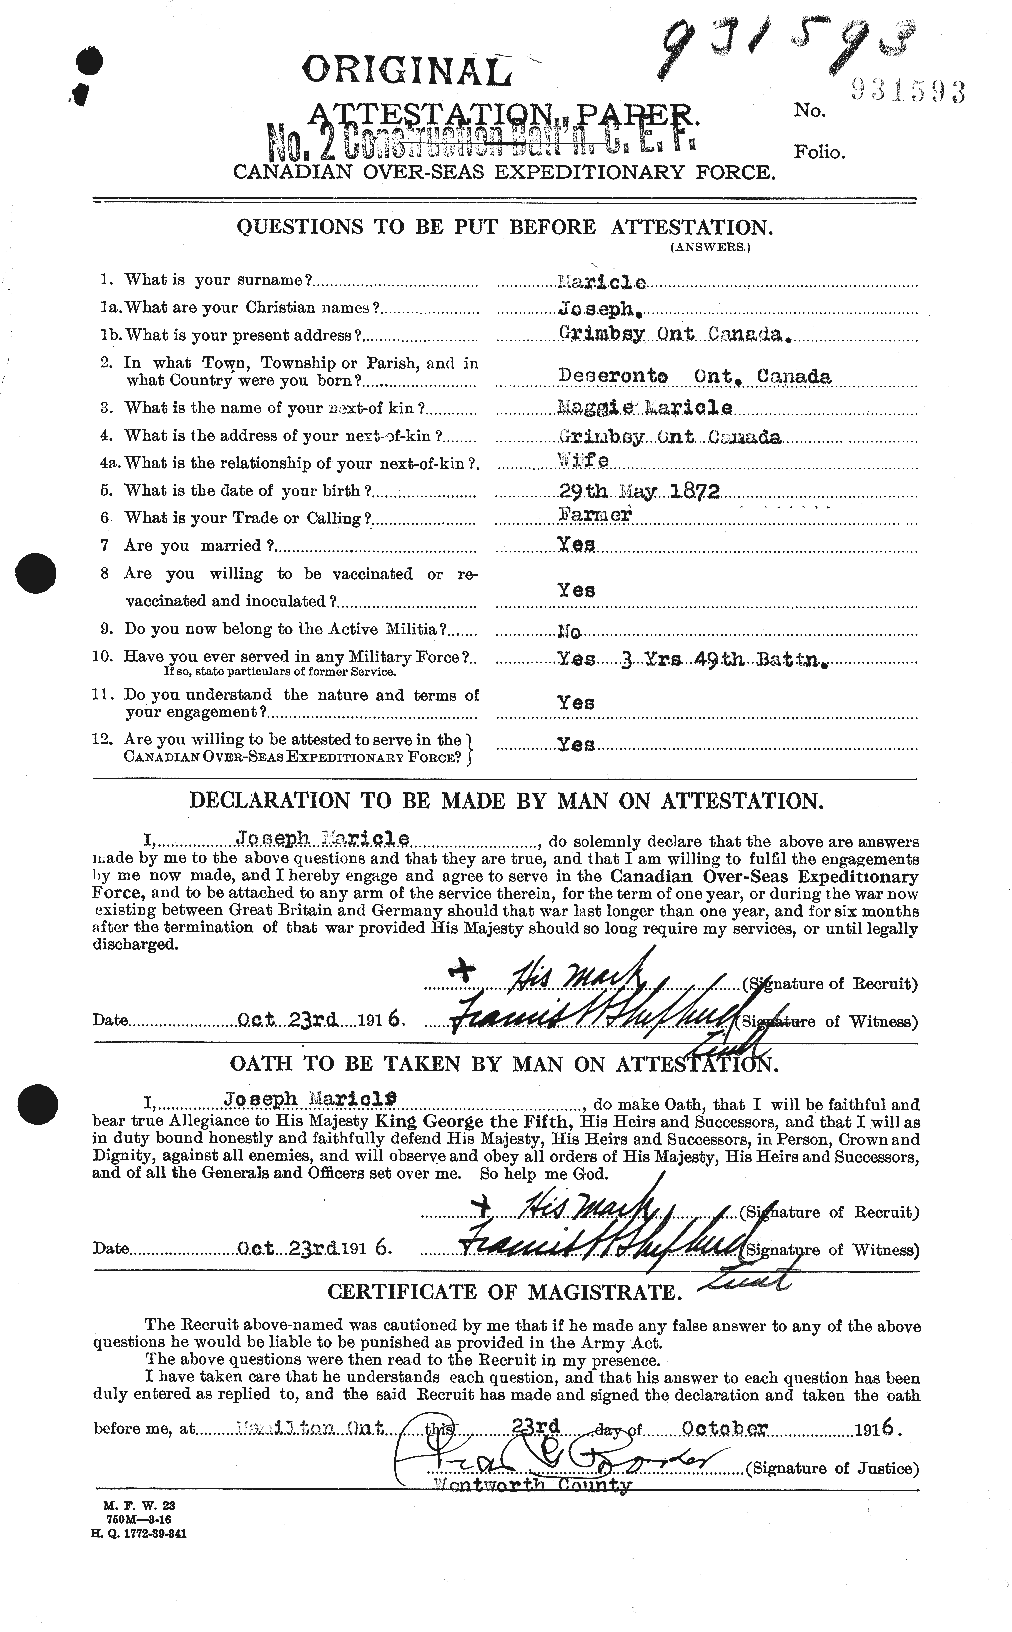 Personnel Records of the First World War - CEF 481304a